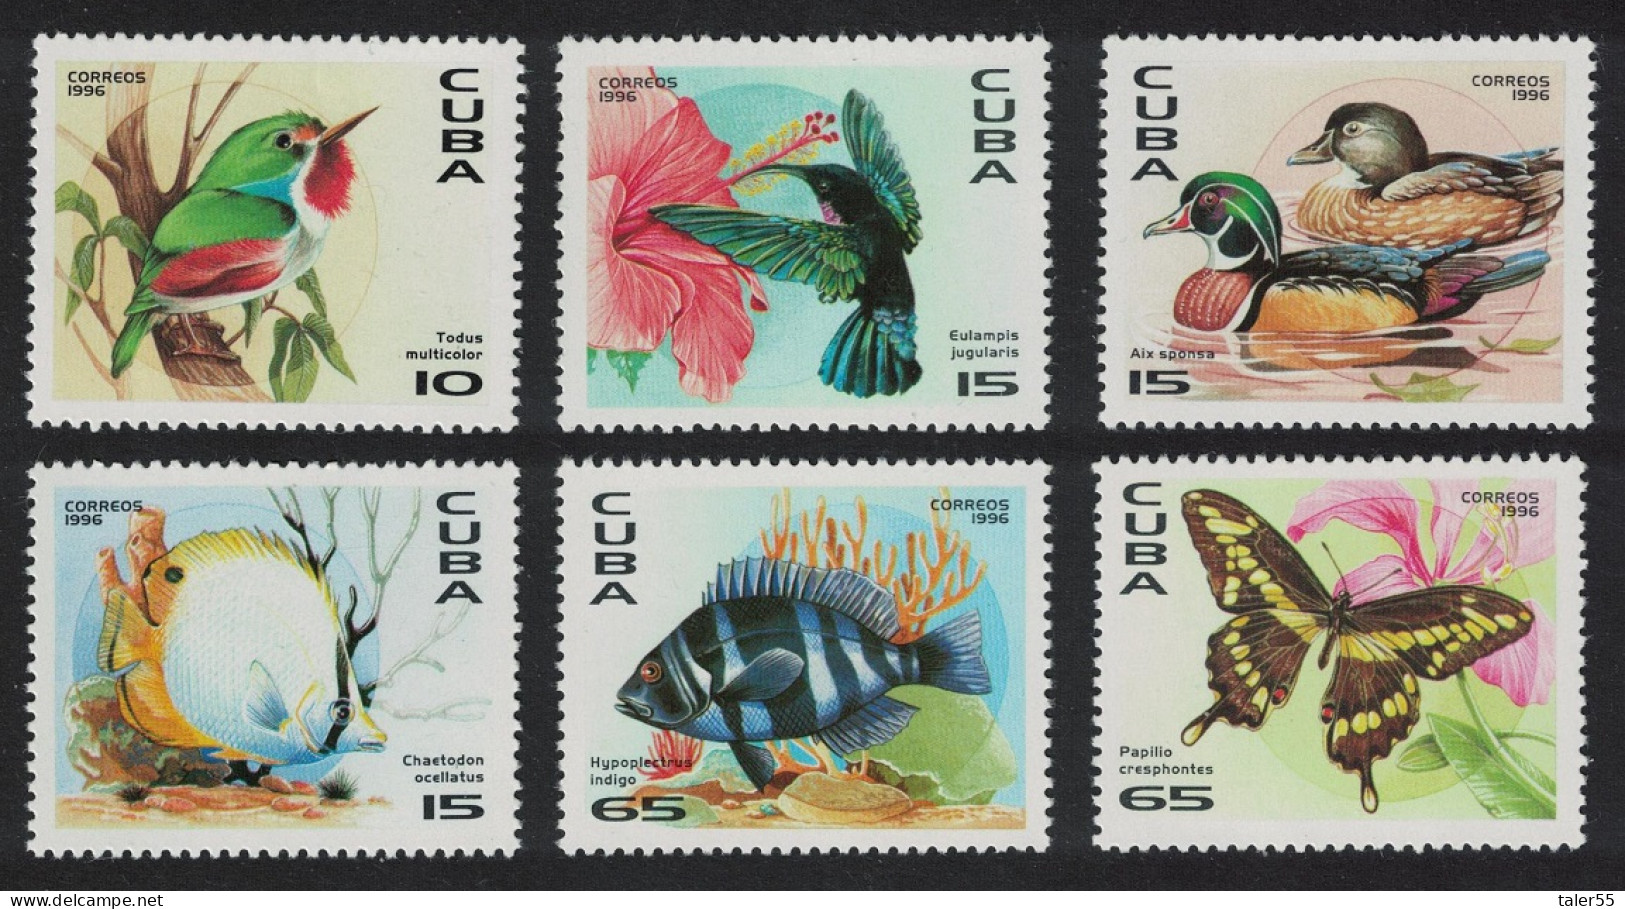 Caribic Birds Fish Butterfly 6v 1996 MNH SG#4079-4084 - Unused Stamps